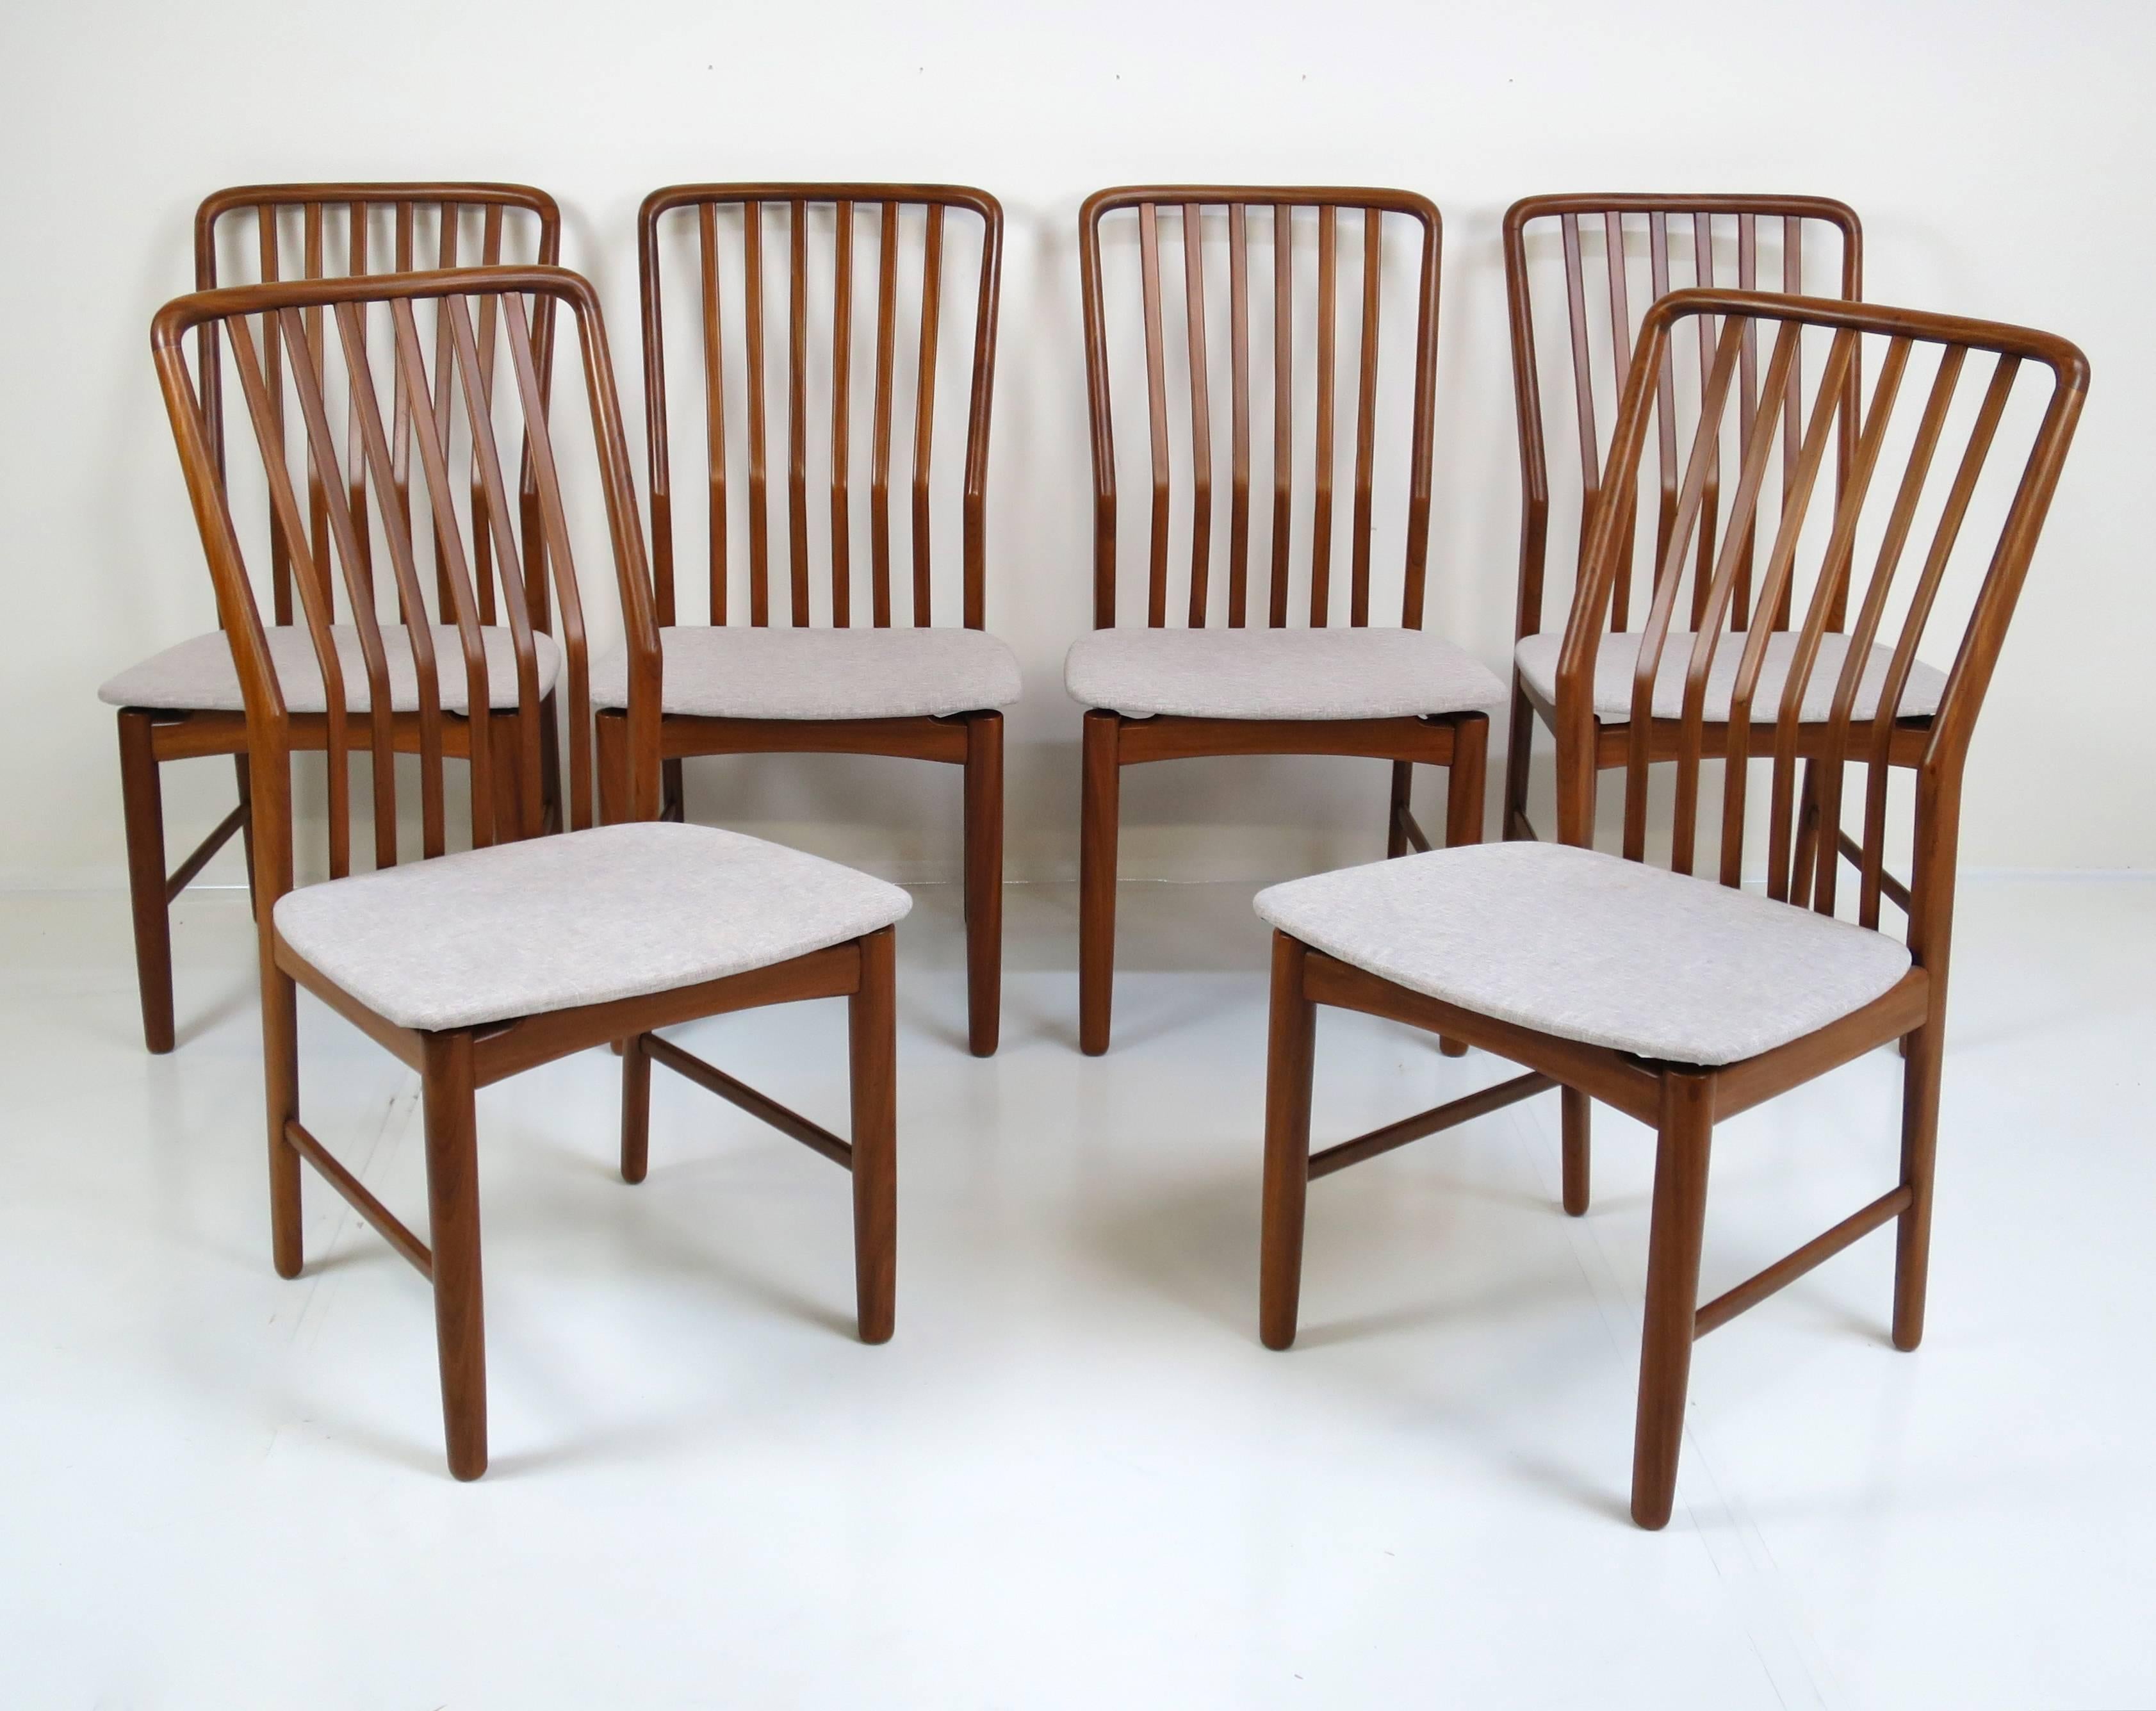 Set of six sculptural teak dining chairs. Designed by Svend Madsen and imported by Moreddi.